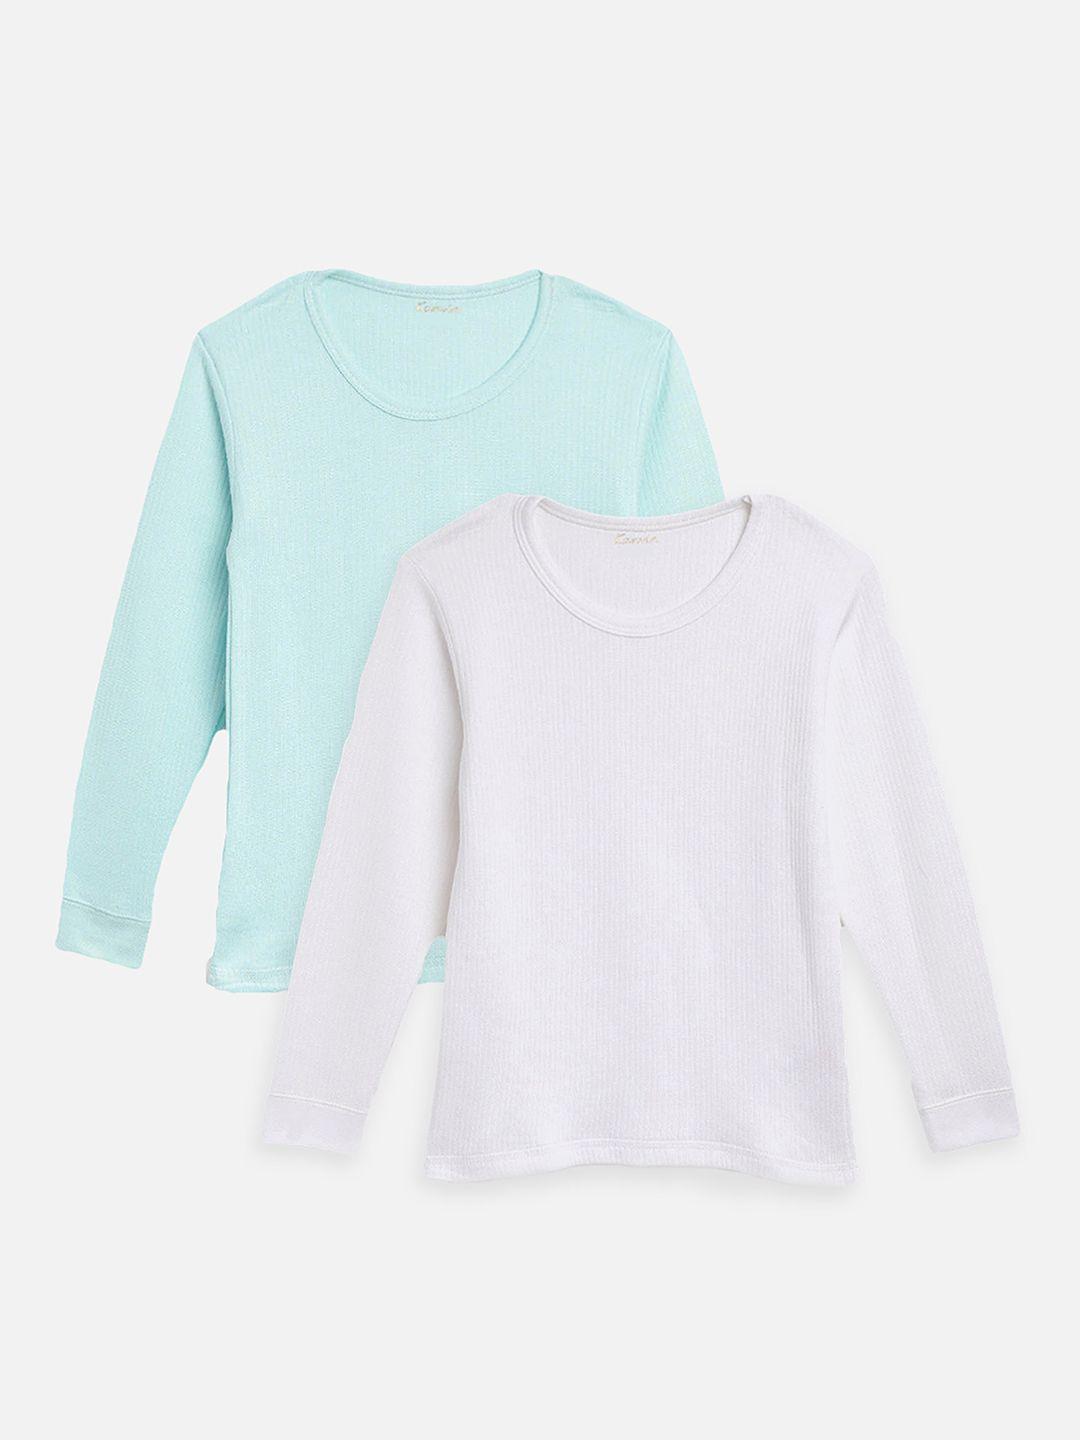 kanvin boys  turquoise blue and white pack of 2 solid thermal tops